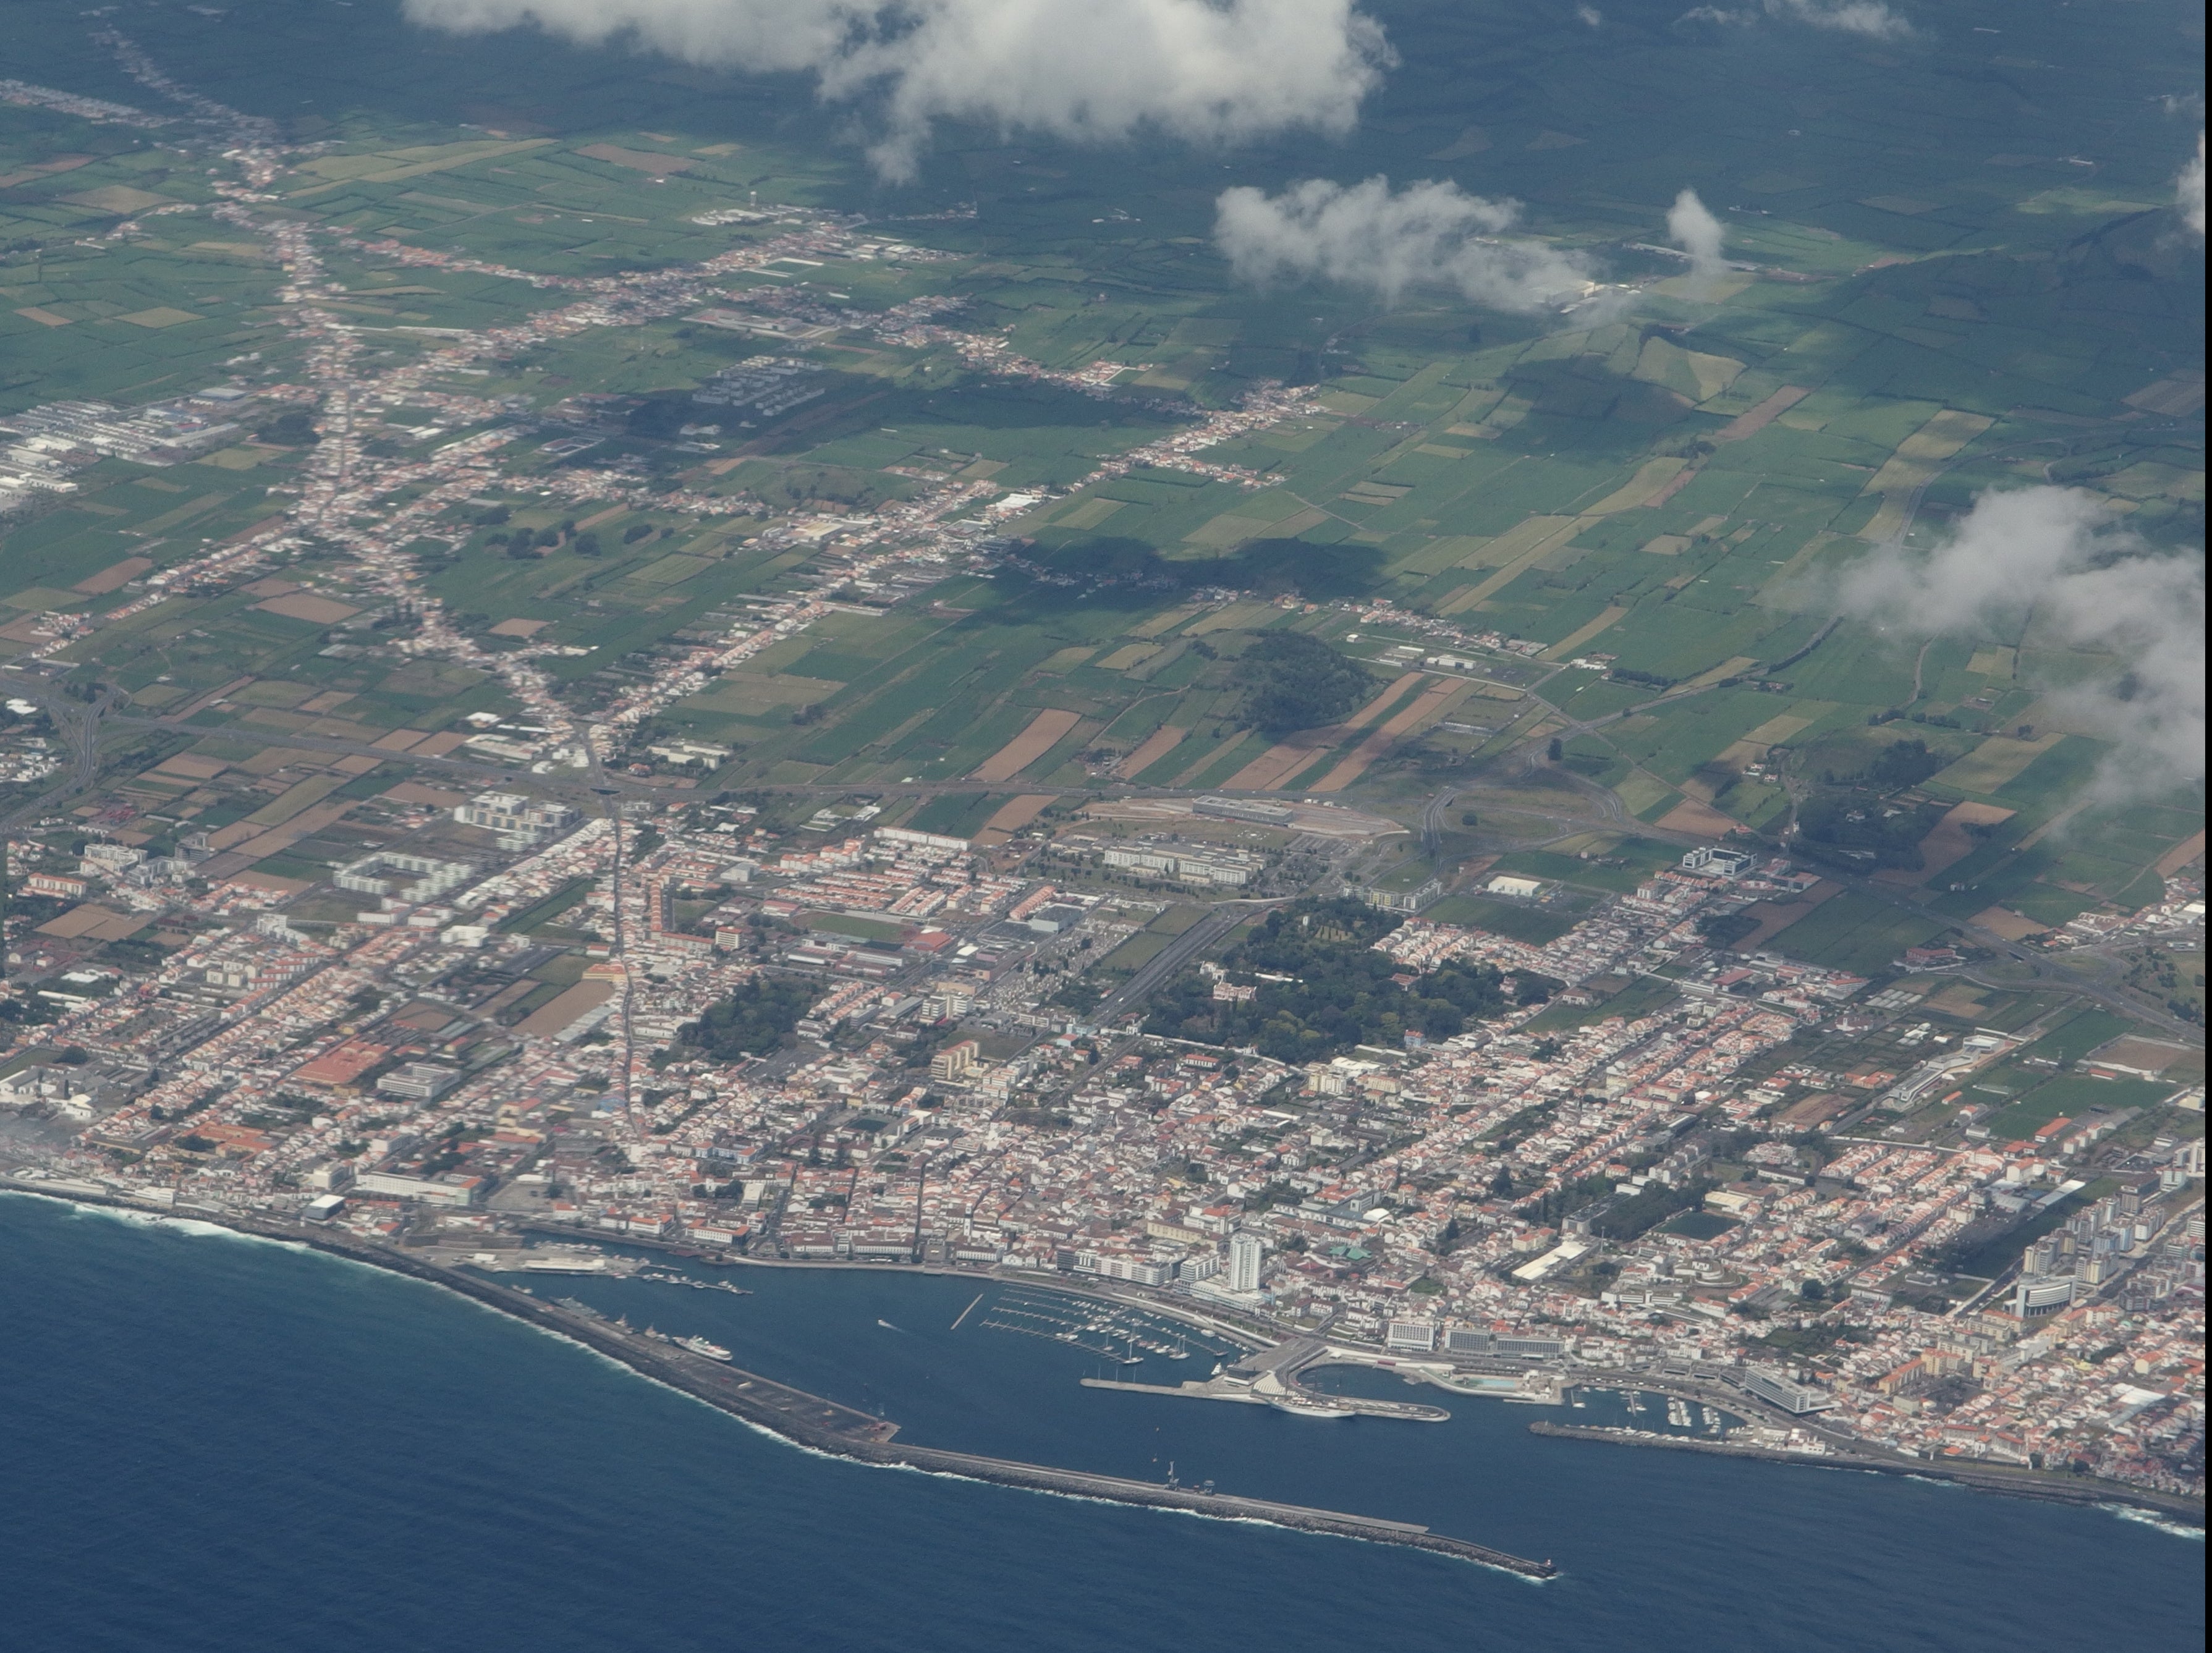 Arriving soon: a flight preparing to land at Ponta Delgada in the Azores